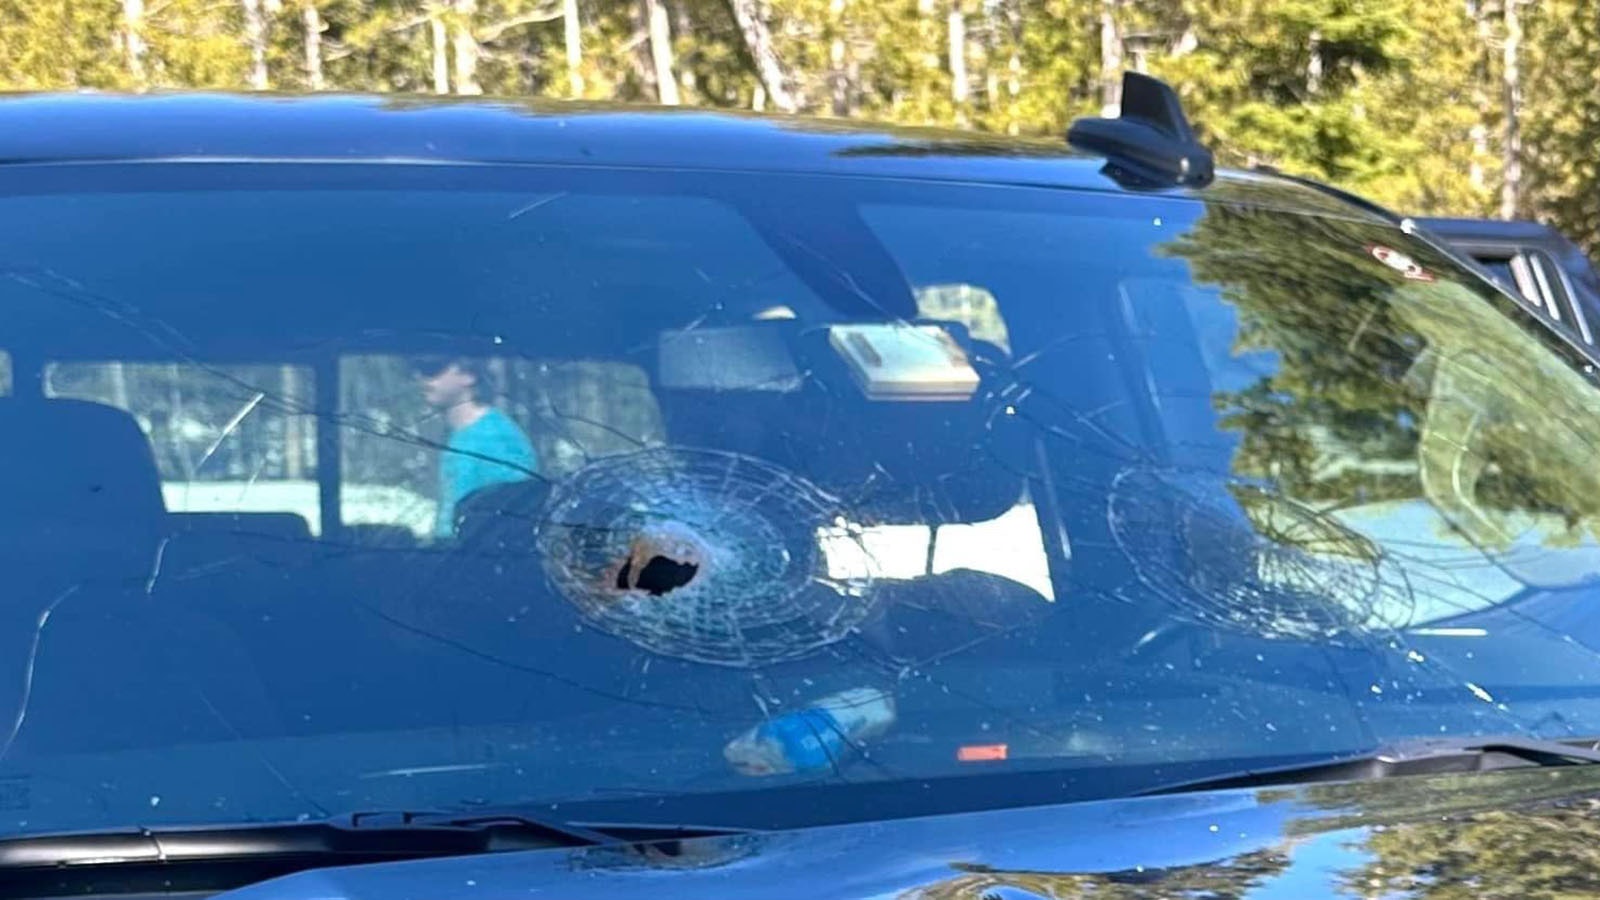 A can of bear spray exploded in a vehicle in an employee lot at Yellowstone National Park, blowing through the windshield and launching about 200 feet.